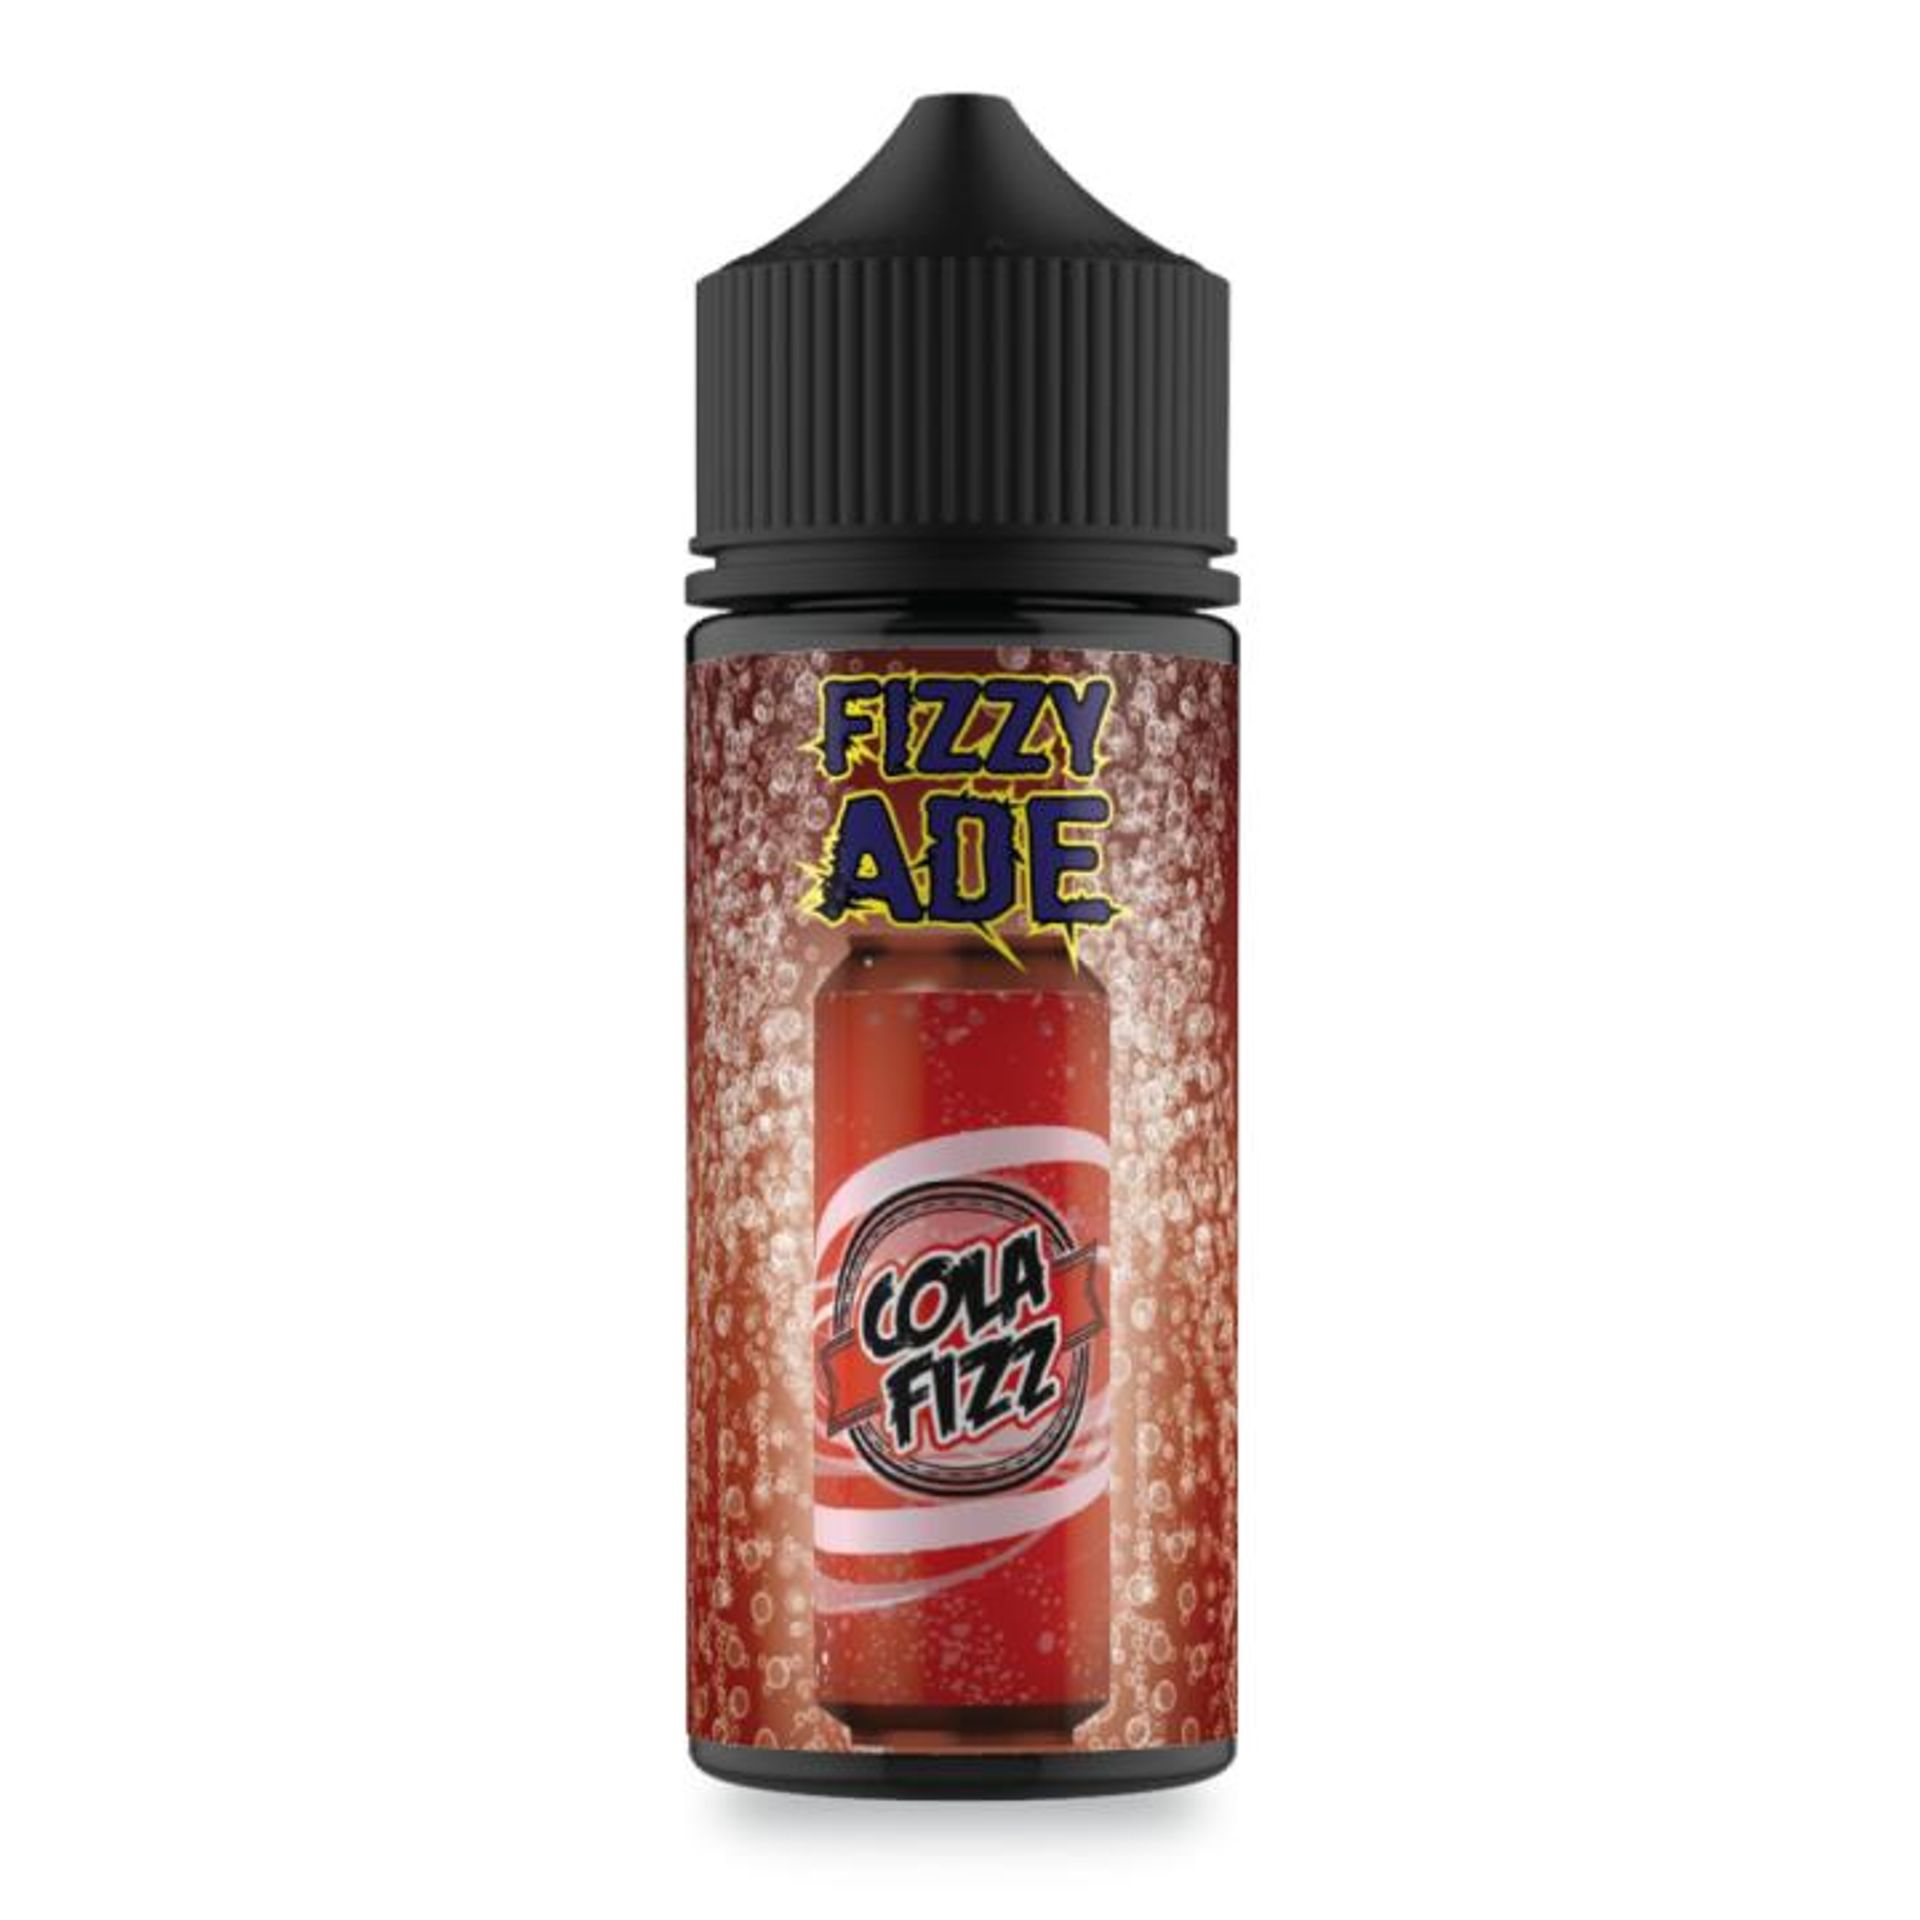 Image of Cola Fizz by Fizzy Ade